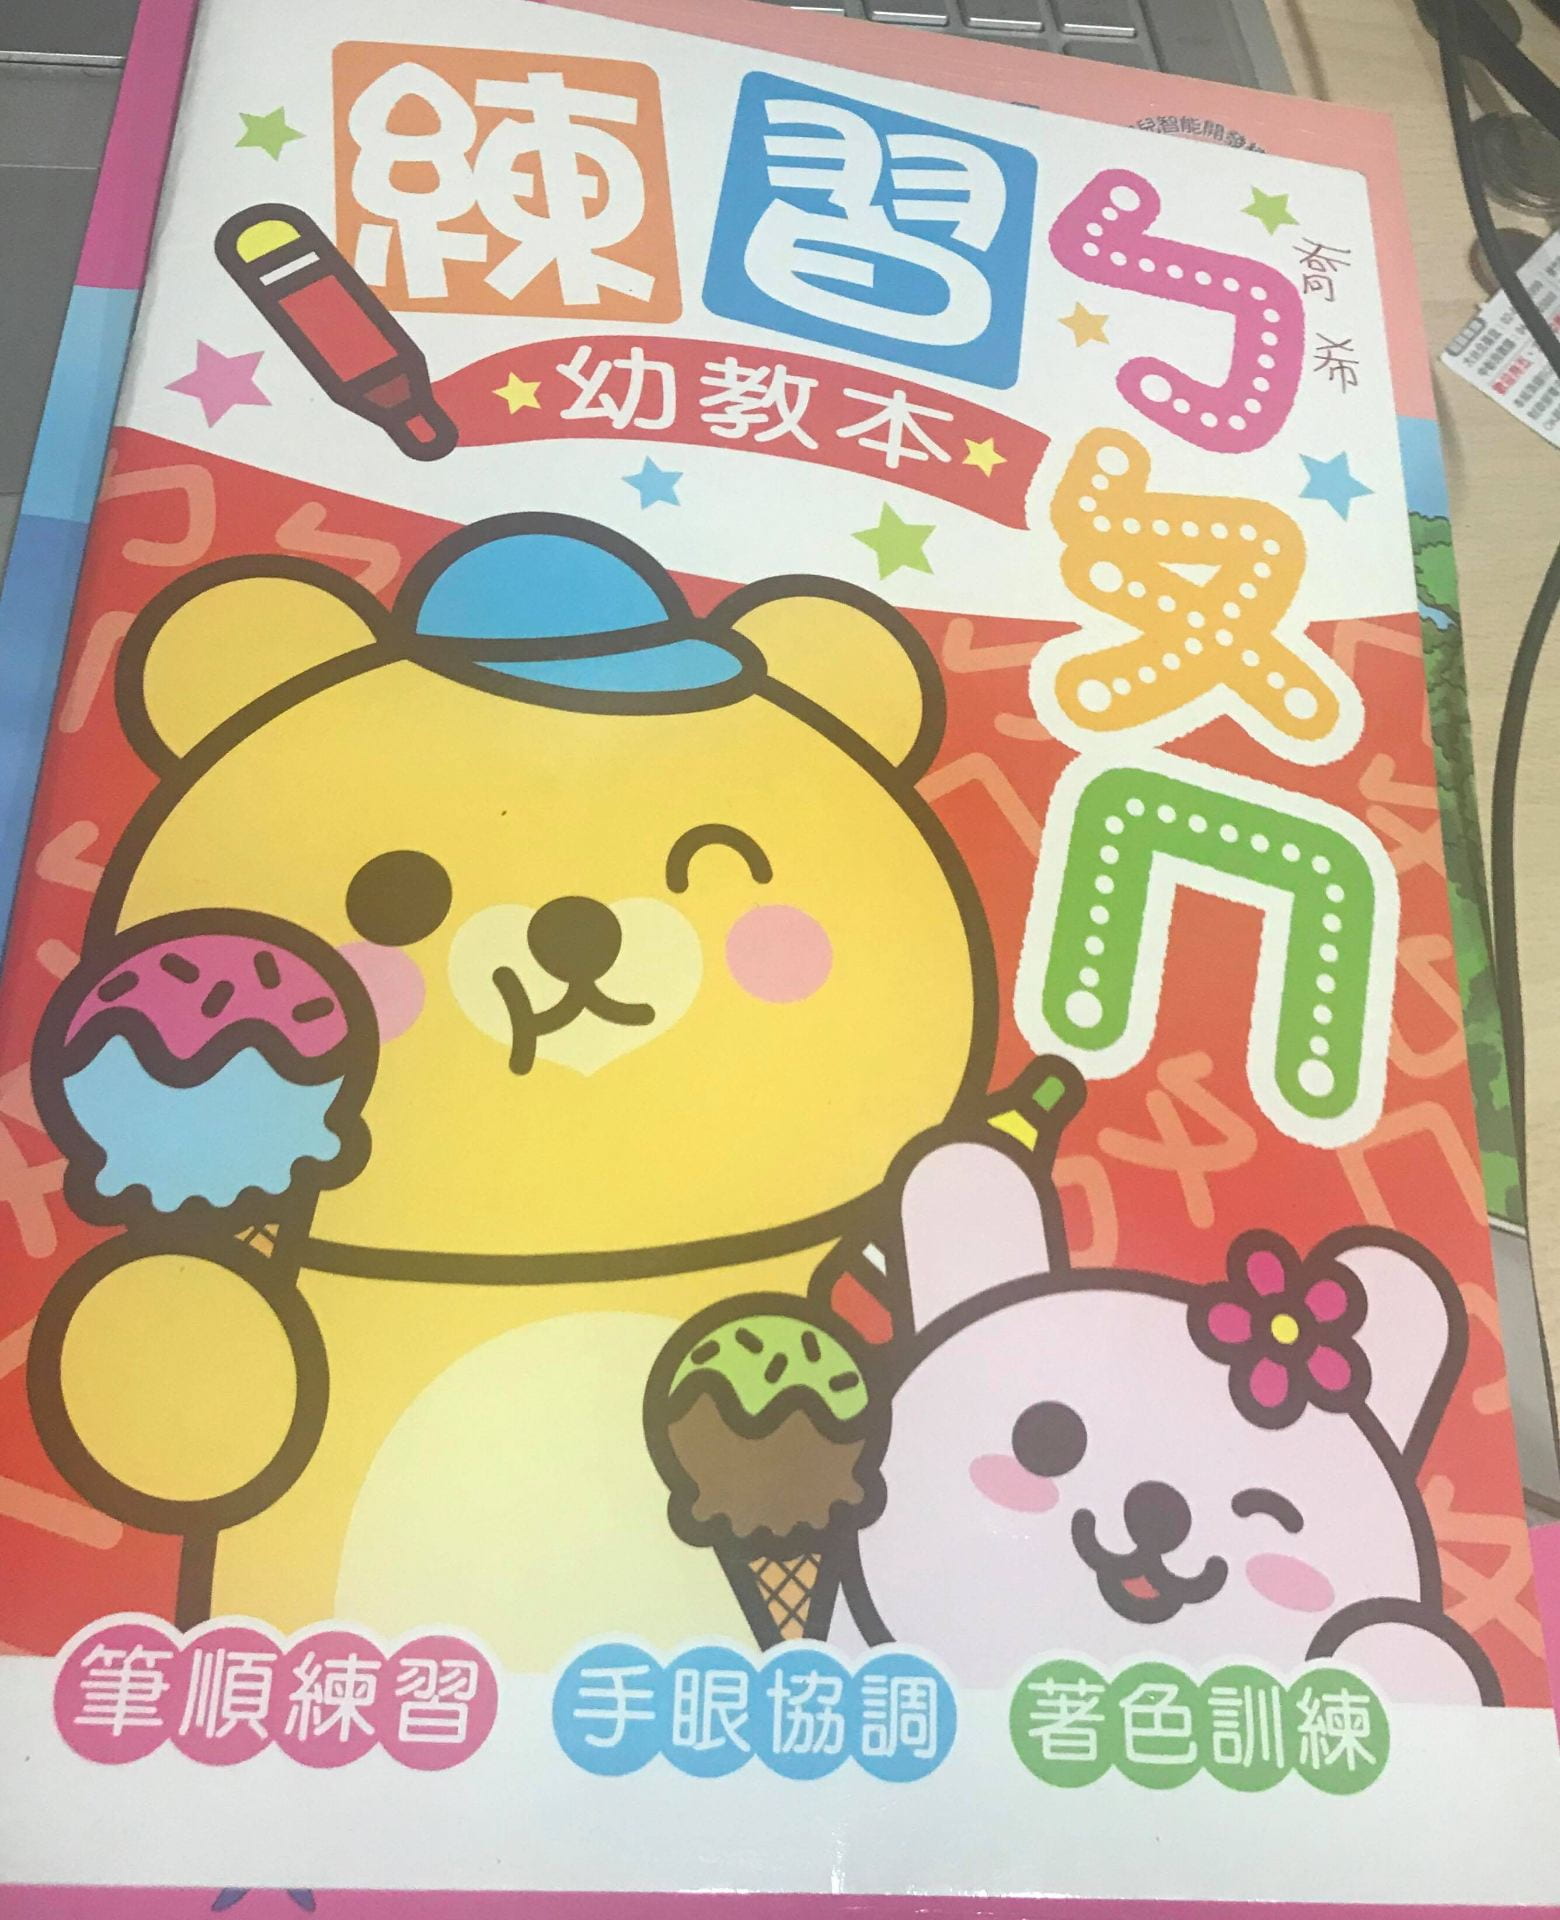 colorful children's Chinese Zhuyin practice book with cute characters on the cover